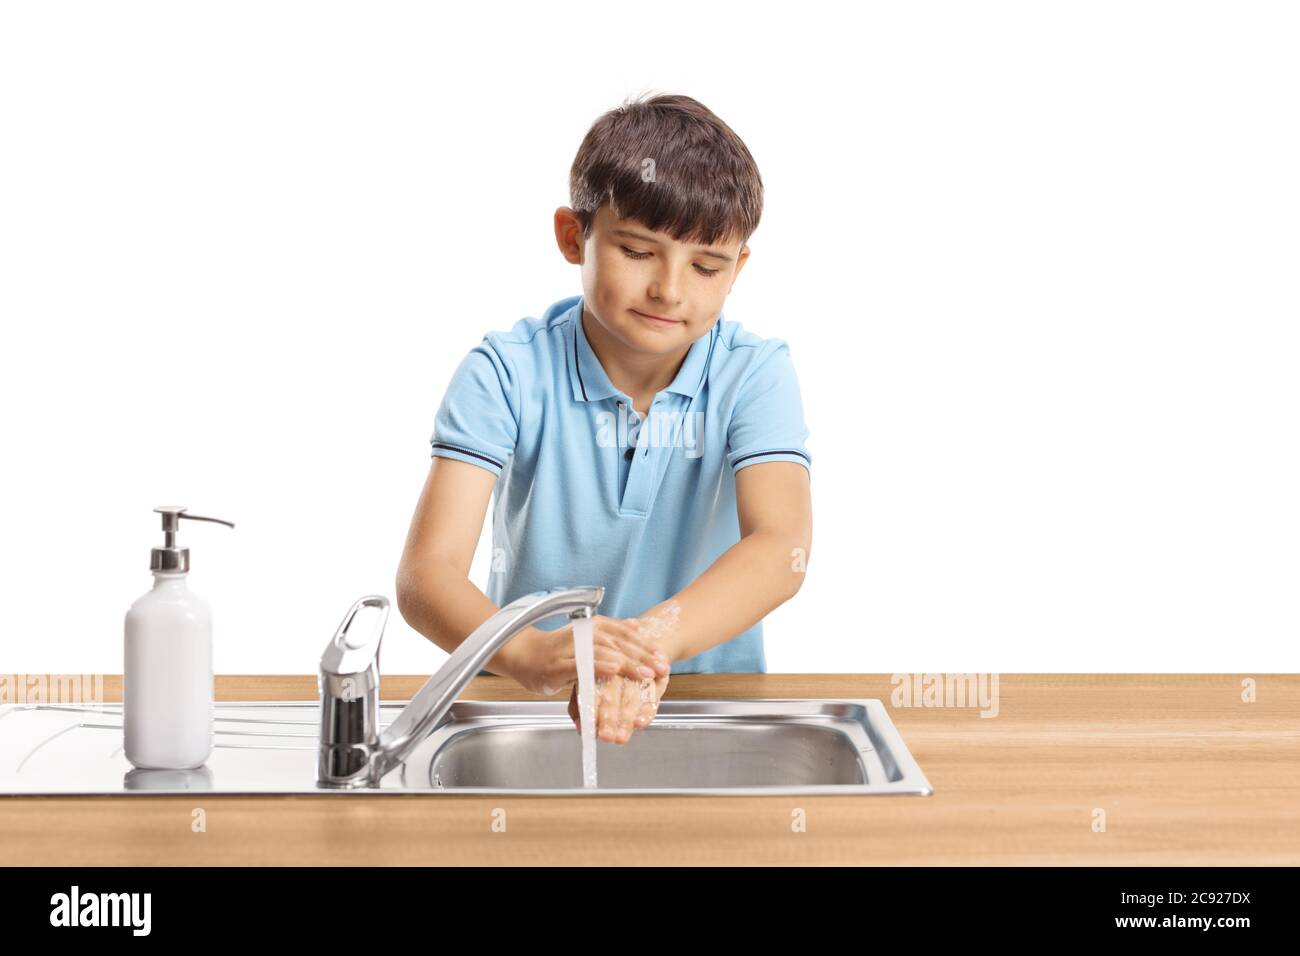 Portrait of a kid washing hands in a stainless steel sink isolated on white background Stock Photo